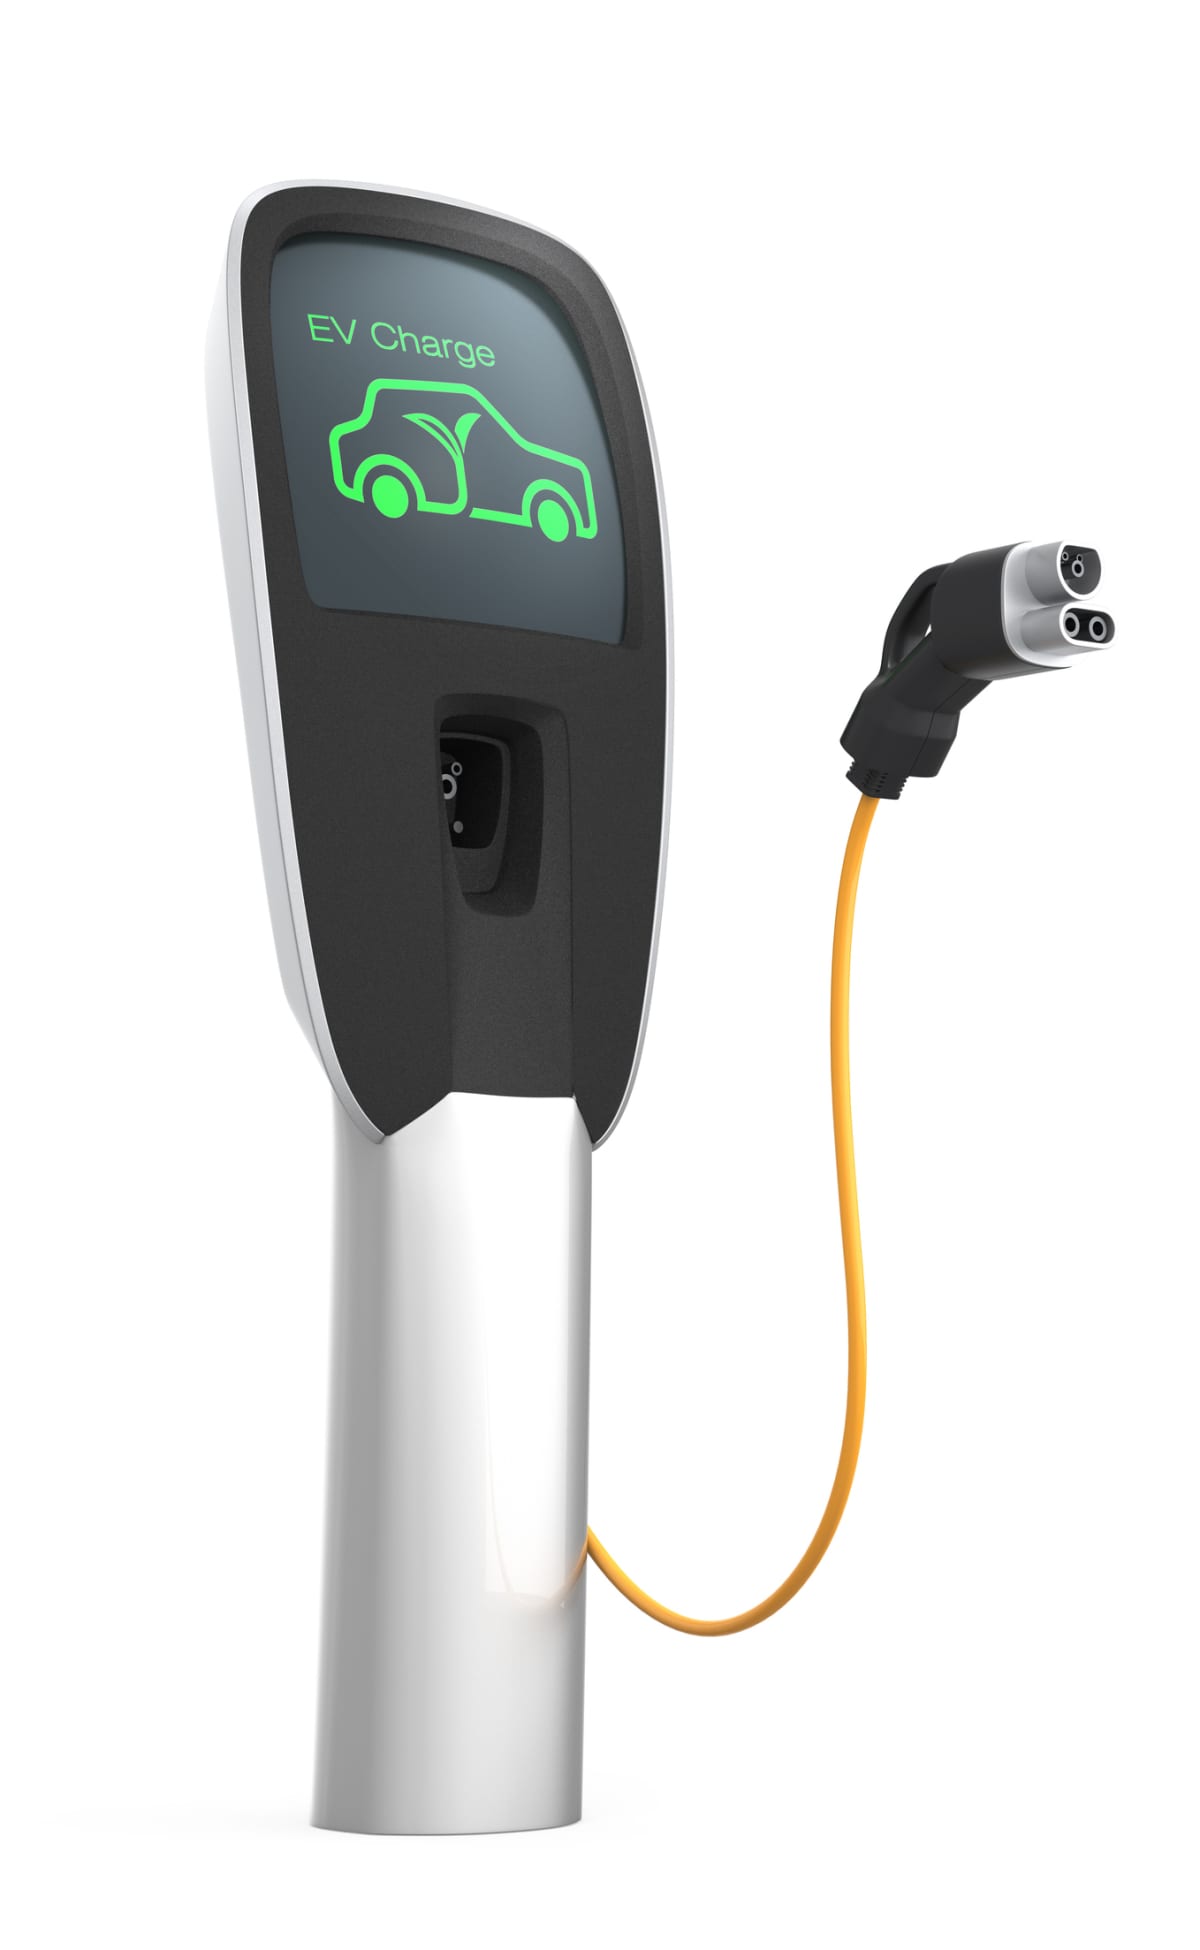 This is a fast electric car charger green energy environment friendly driving vehicle station.